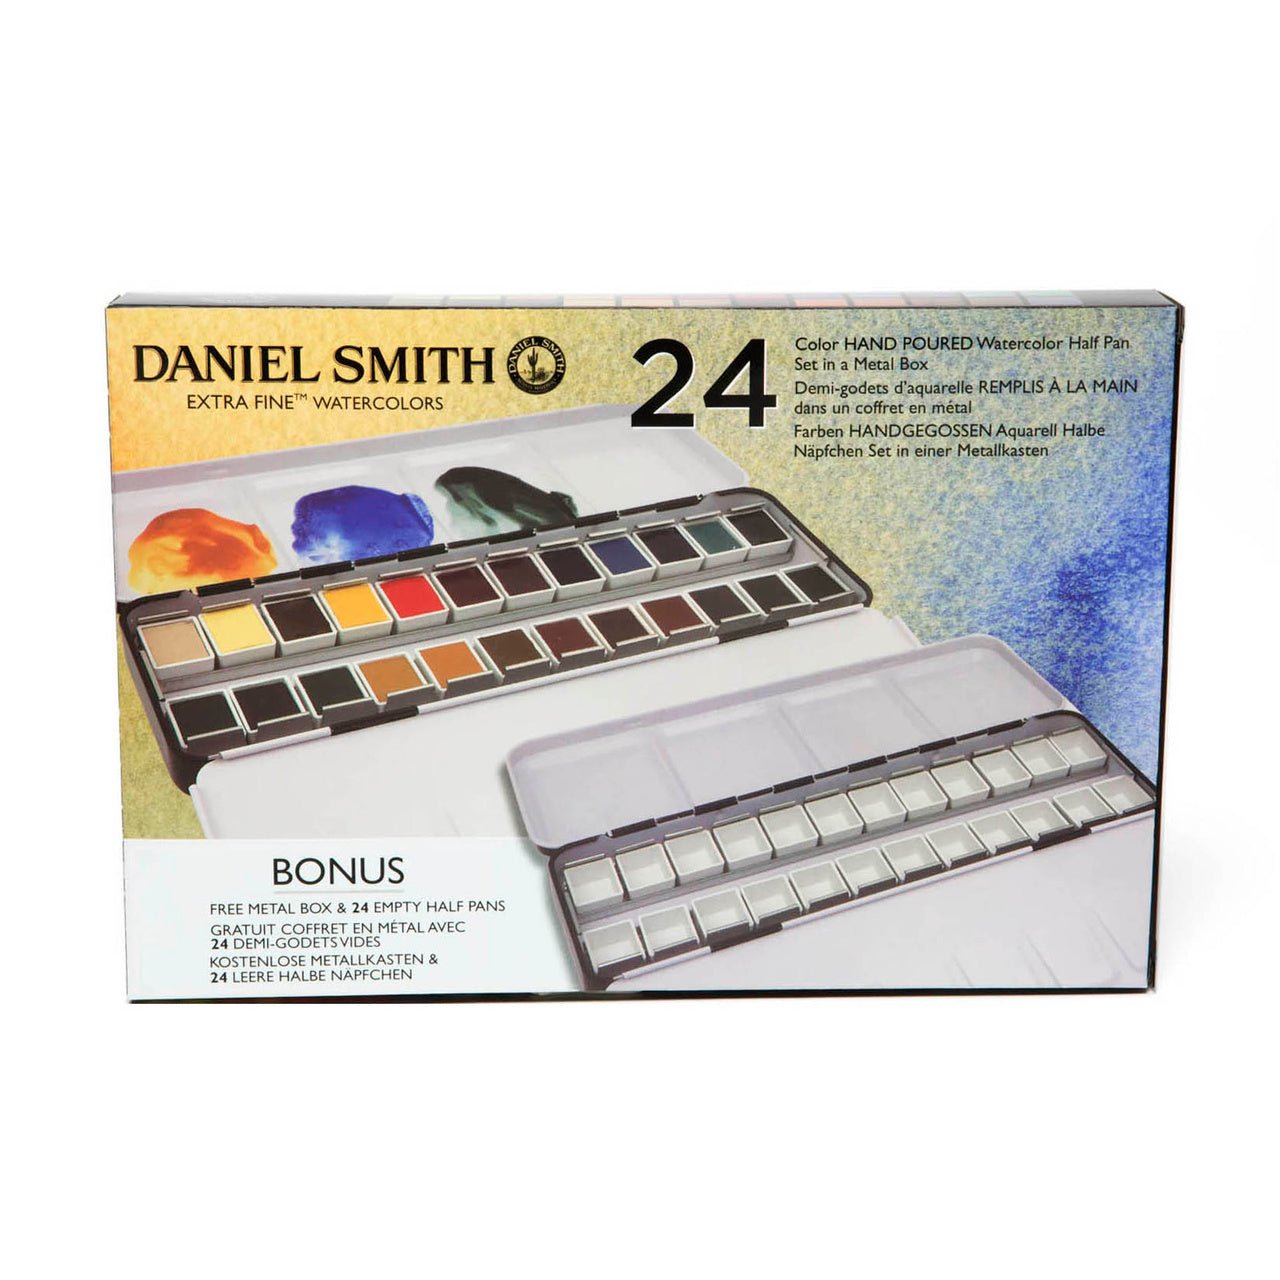 Daniel Smith Extra Fine Watercolor Set - 24 Color Hand Poured Half Pan Set in a METAL BOX with BONUS Metal Box and 24 Empty Half Pans - merriartist.com